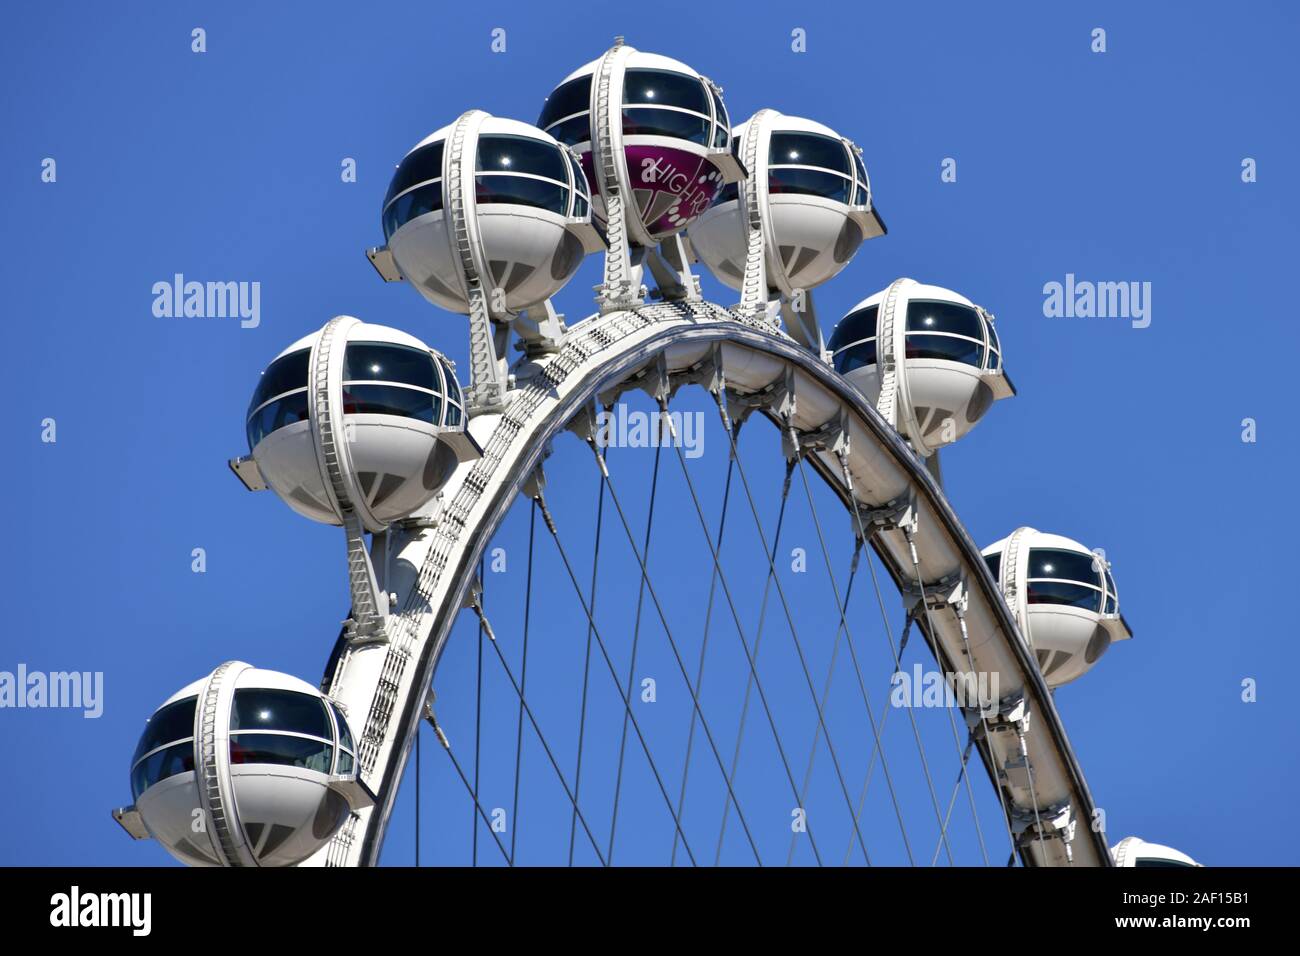 Las Vegas NV USA. 09-30-18. The High Roller is the tallest observation wheel in the world. Stock Photo